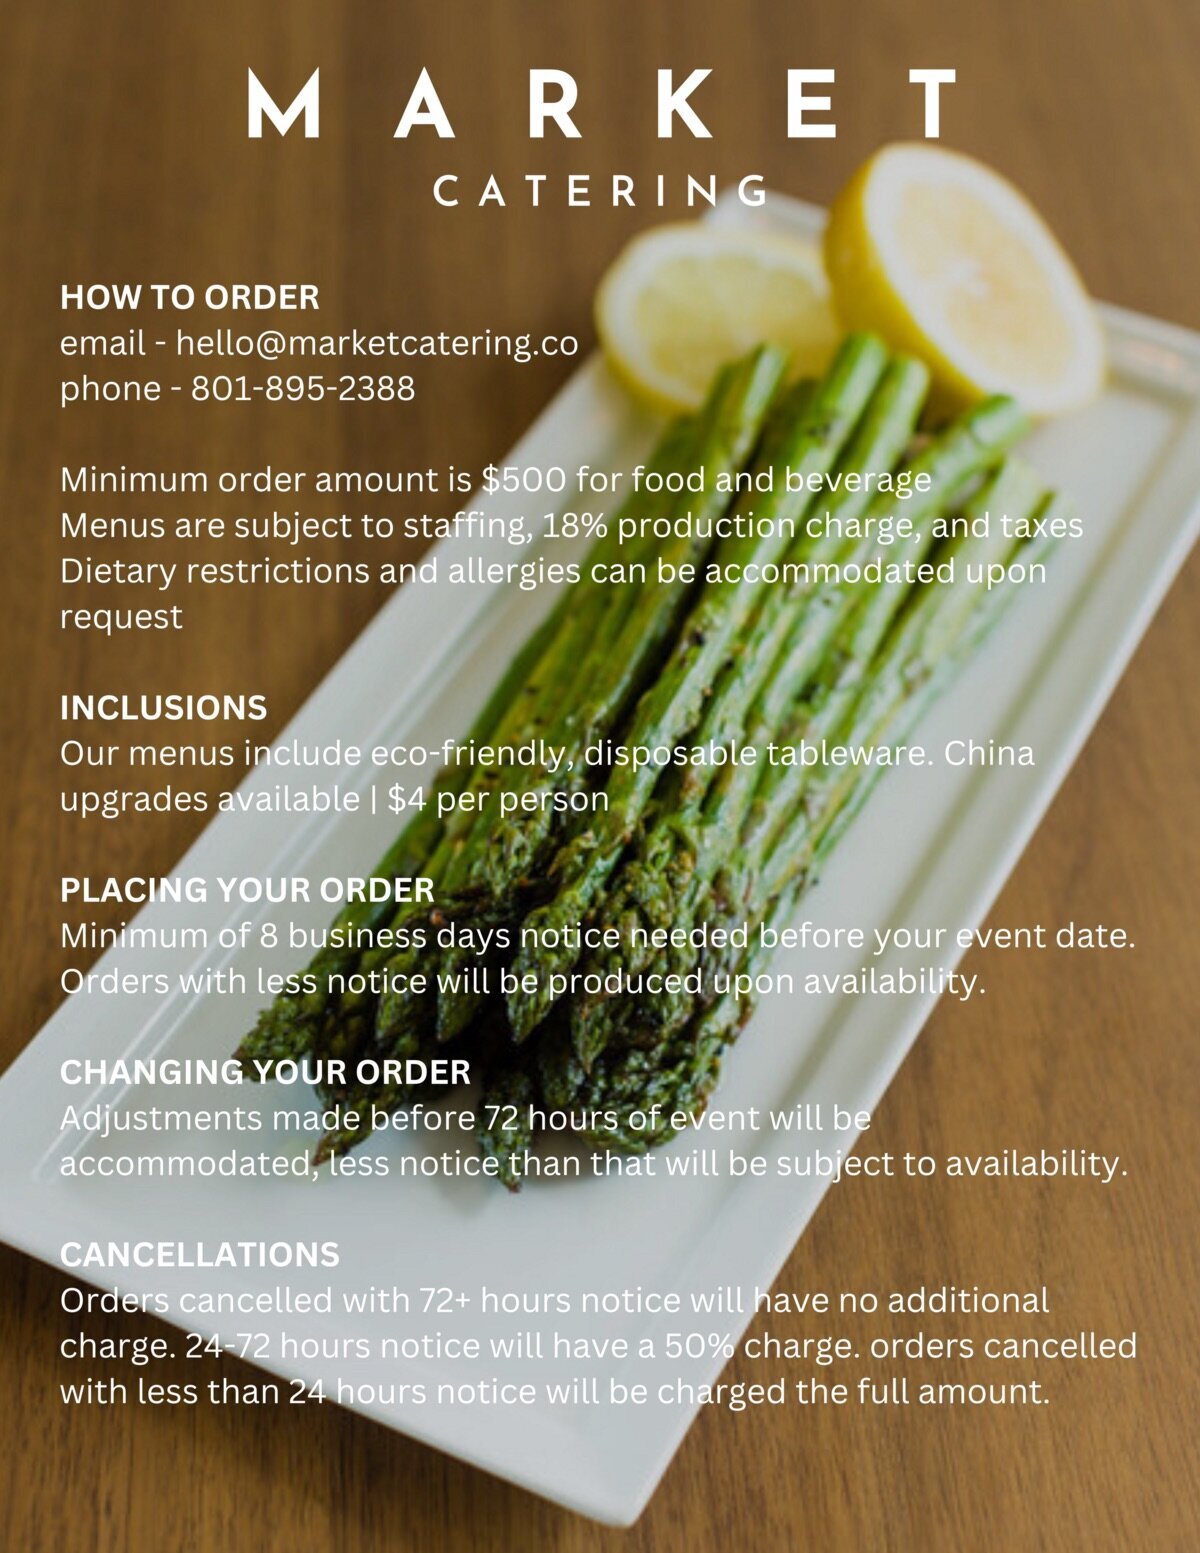 Market Catering Ordering Guidelines